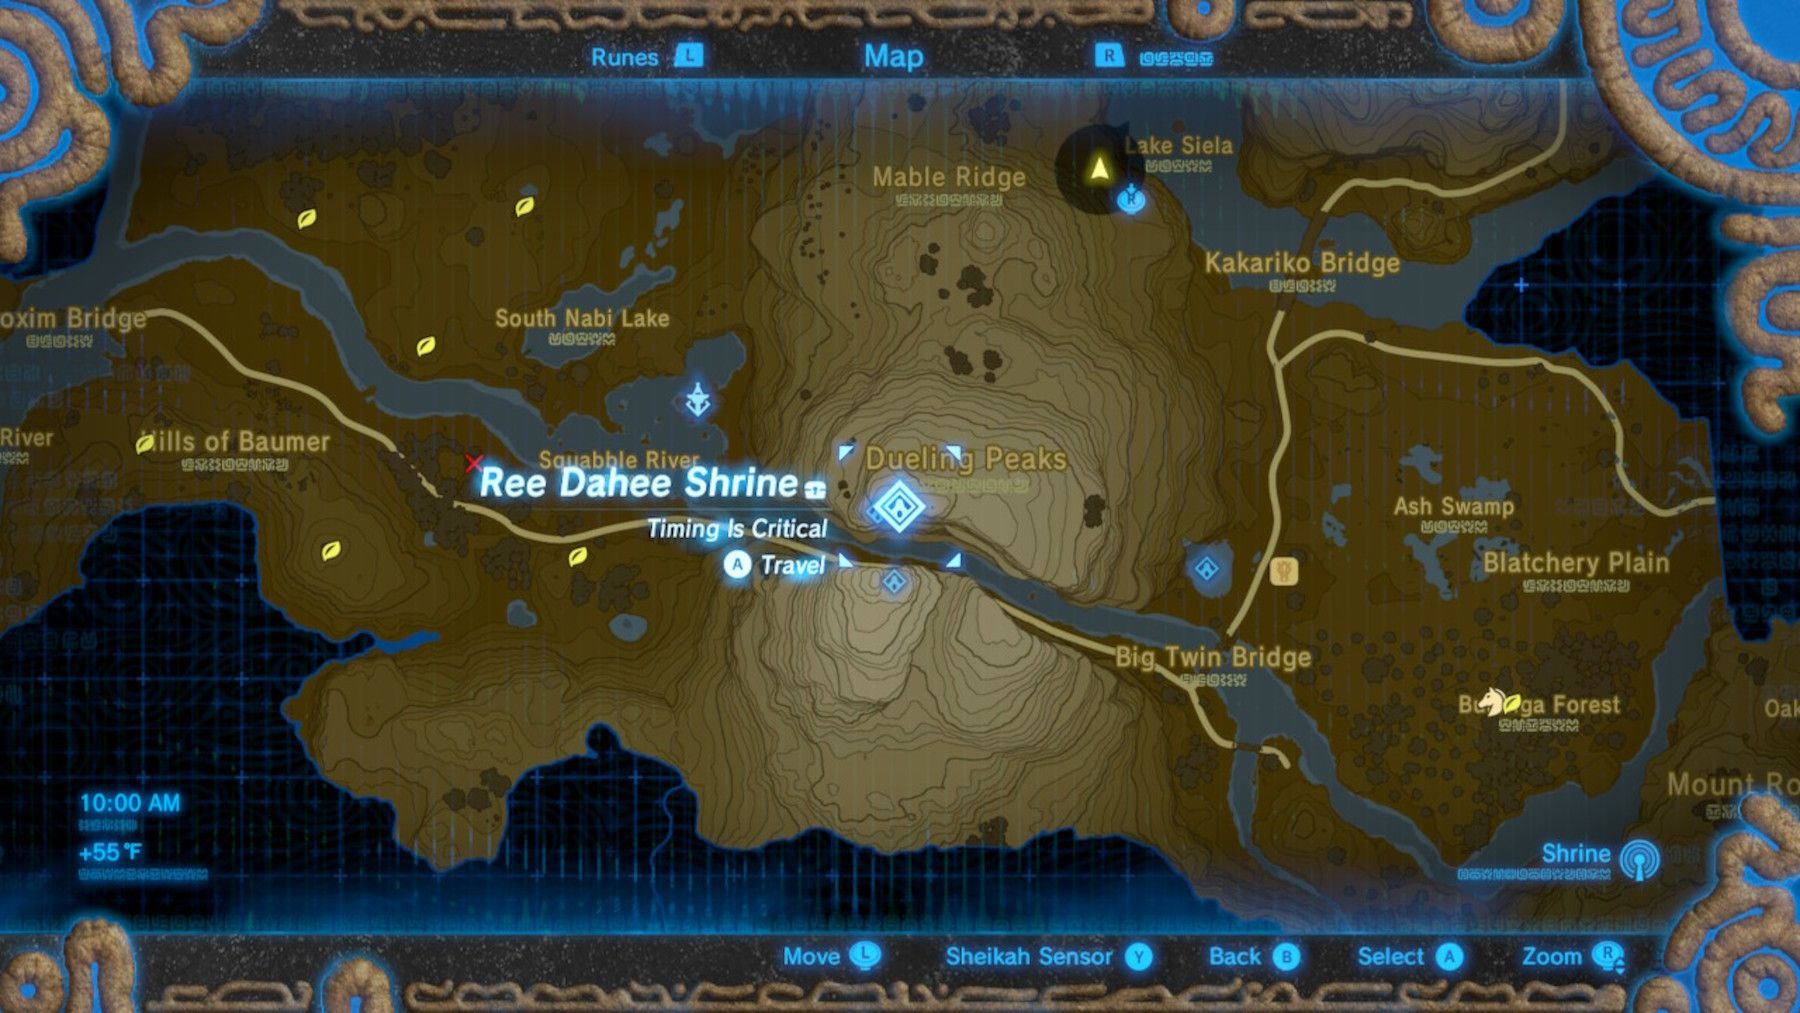 Zelda: Breath of the Wild - All Dueling Peaks Shrine Locations & Solutions